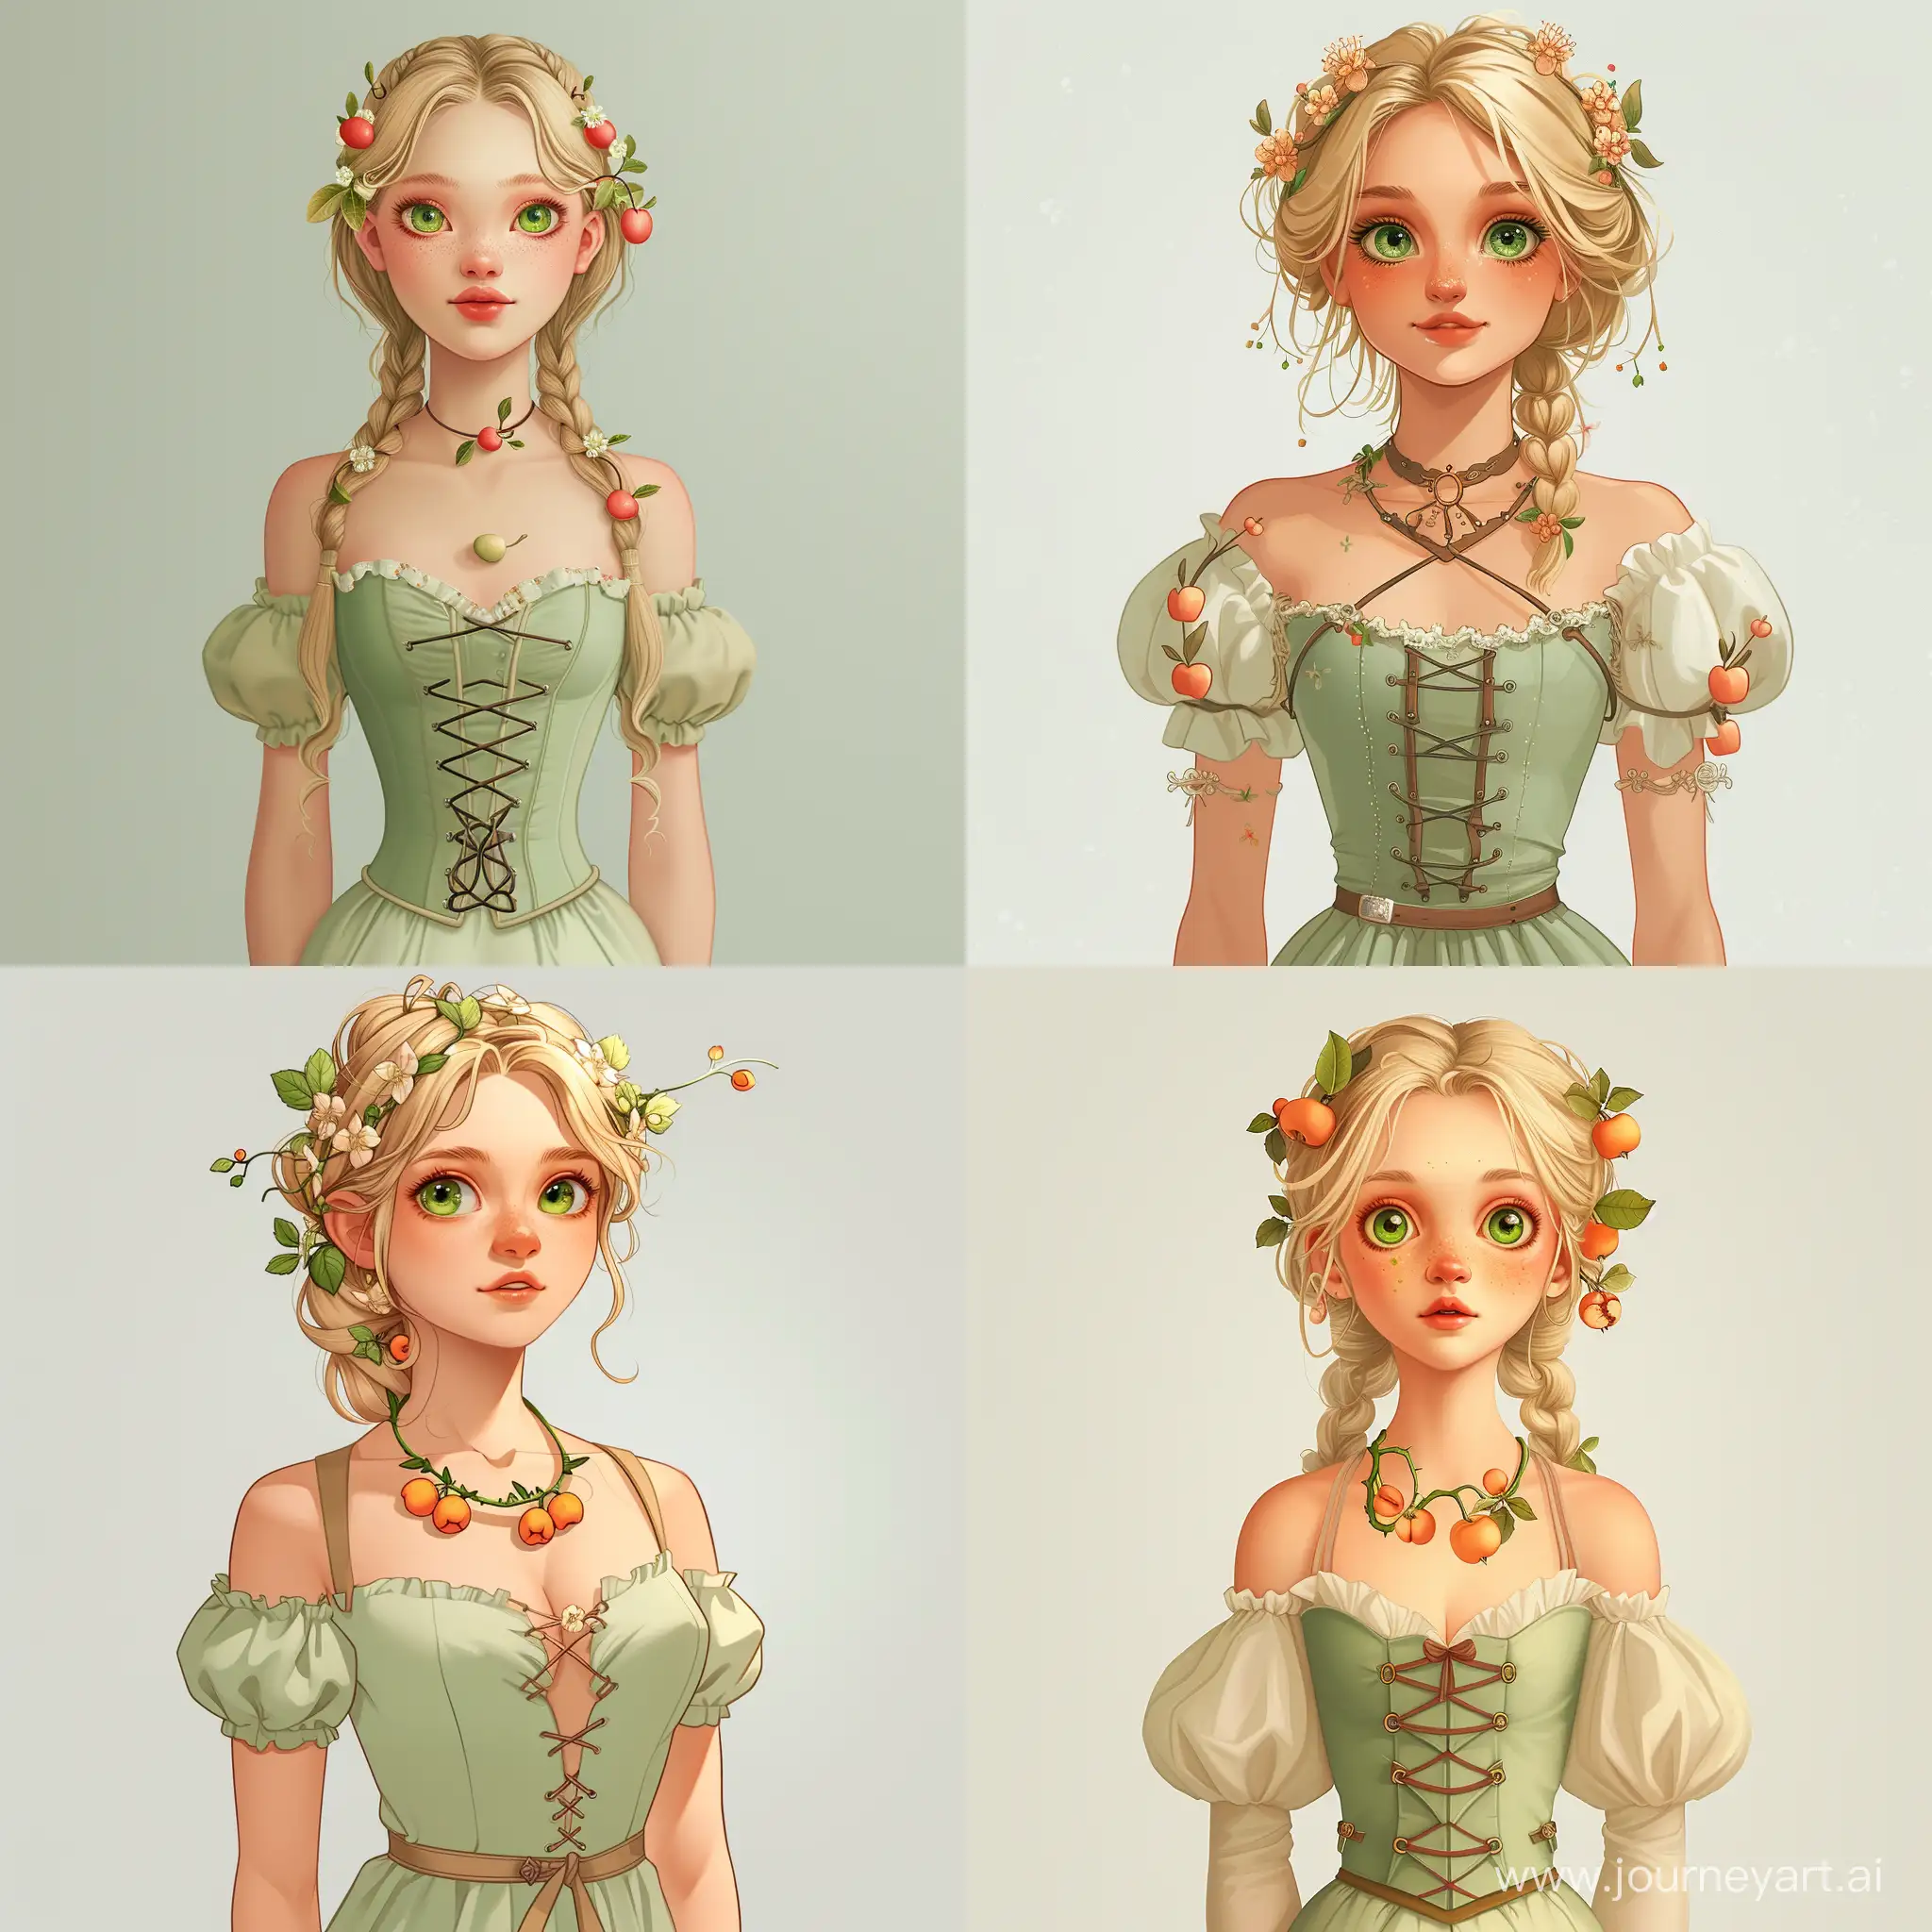 A beautiful young girl, blonde, with big green eyes, with apple blossoms in her hairstyle, with a necklace of flower buds on her, in a dress with puffy sleeves, in a light green corset, with a thin waist, profile portrait, illustration, poster style, flat illustration